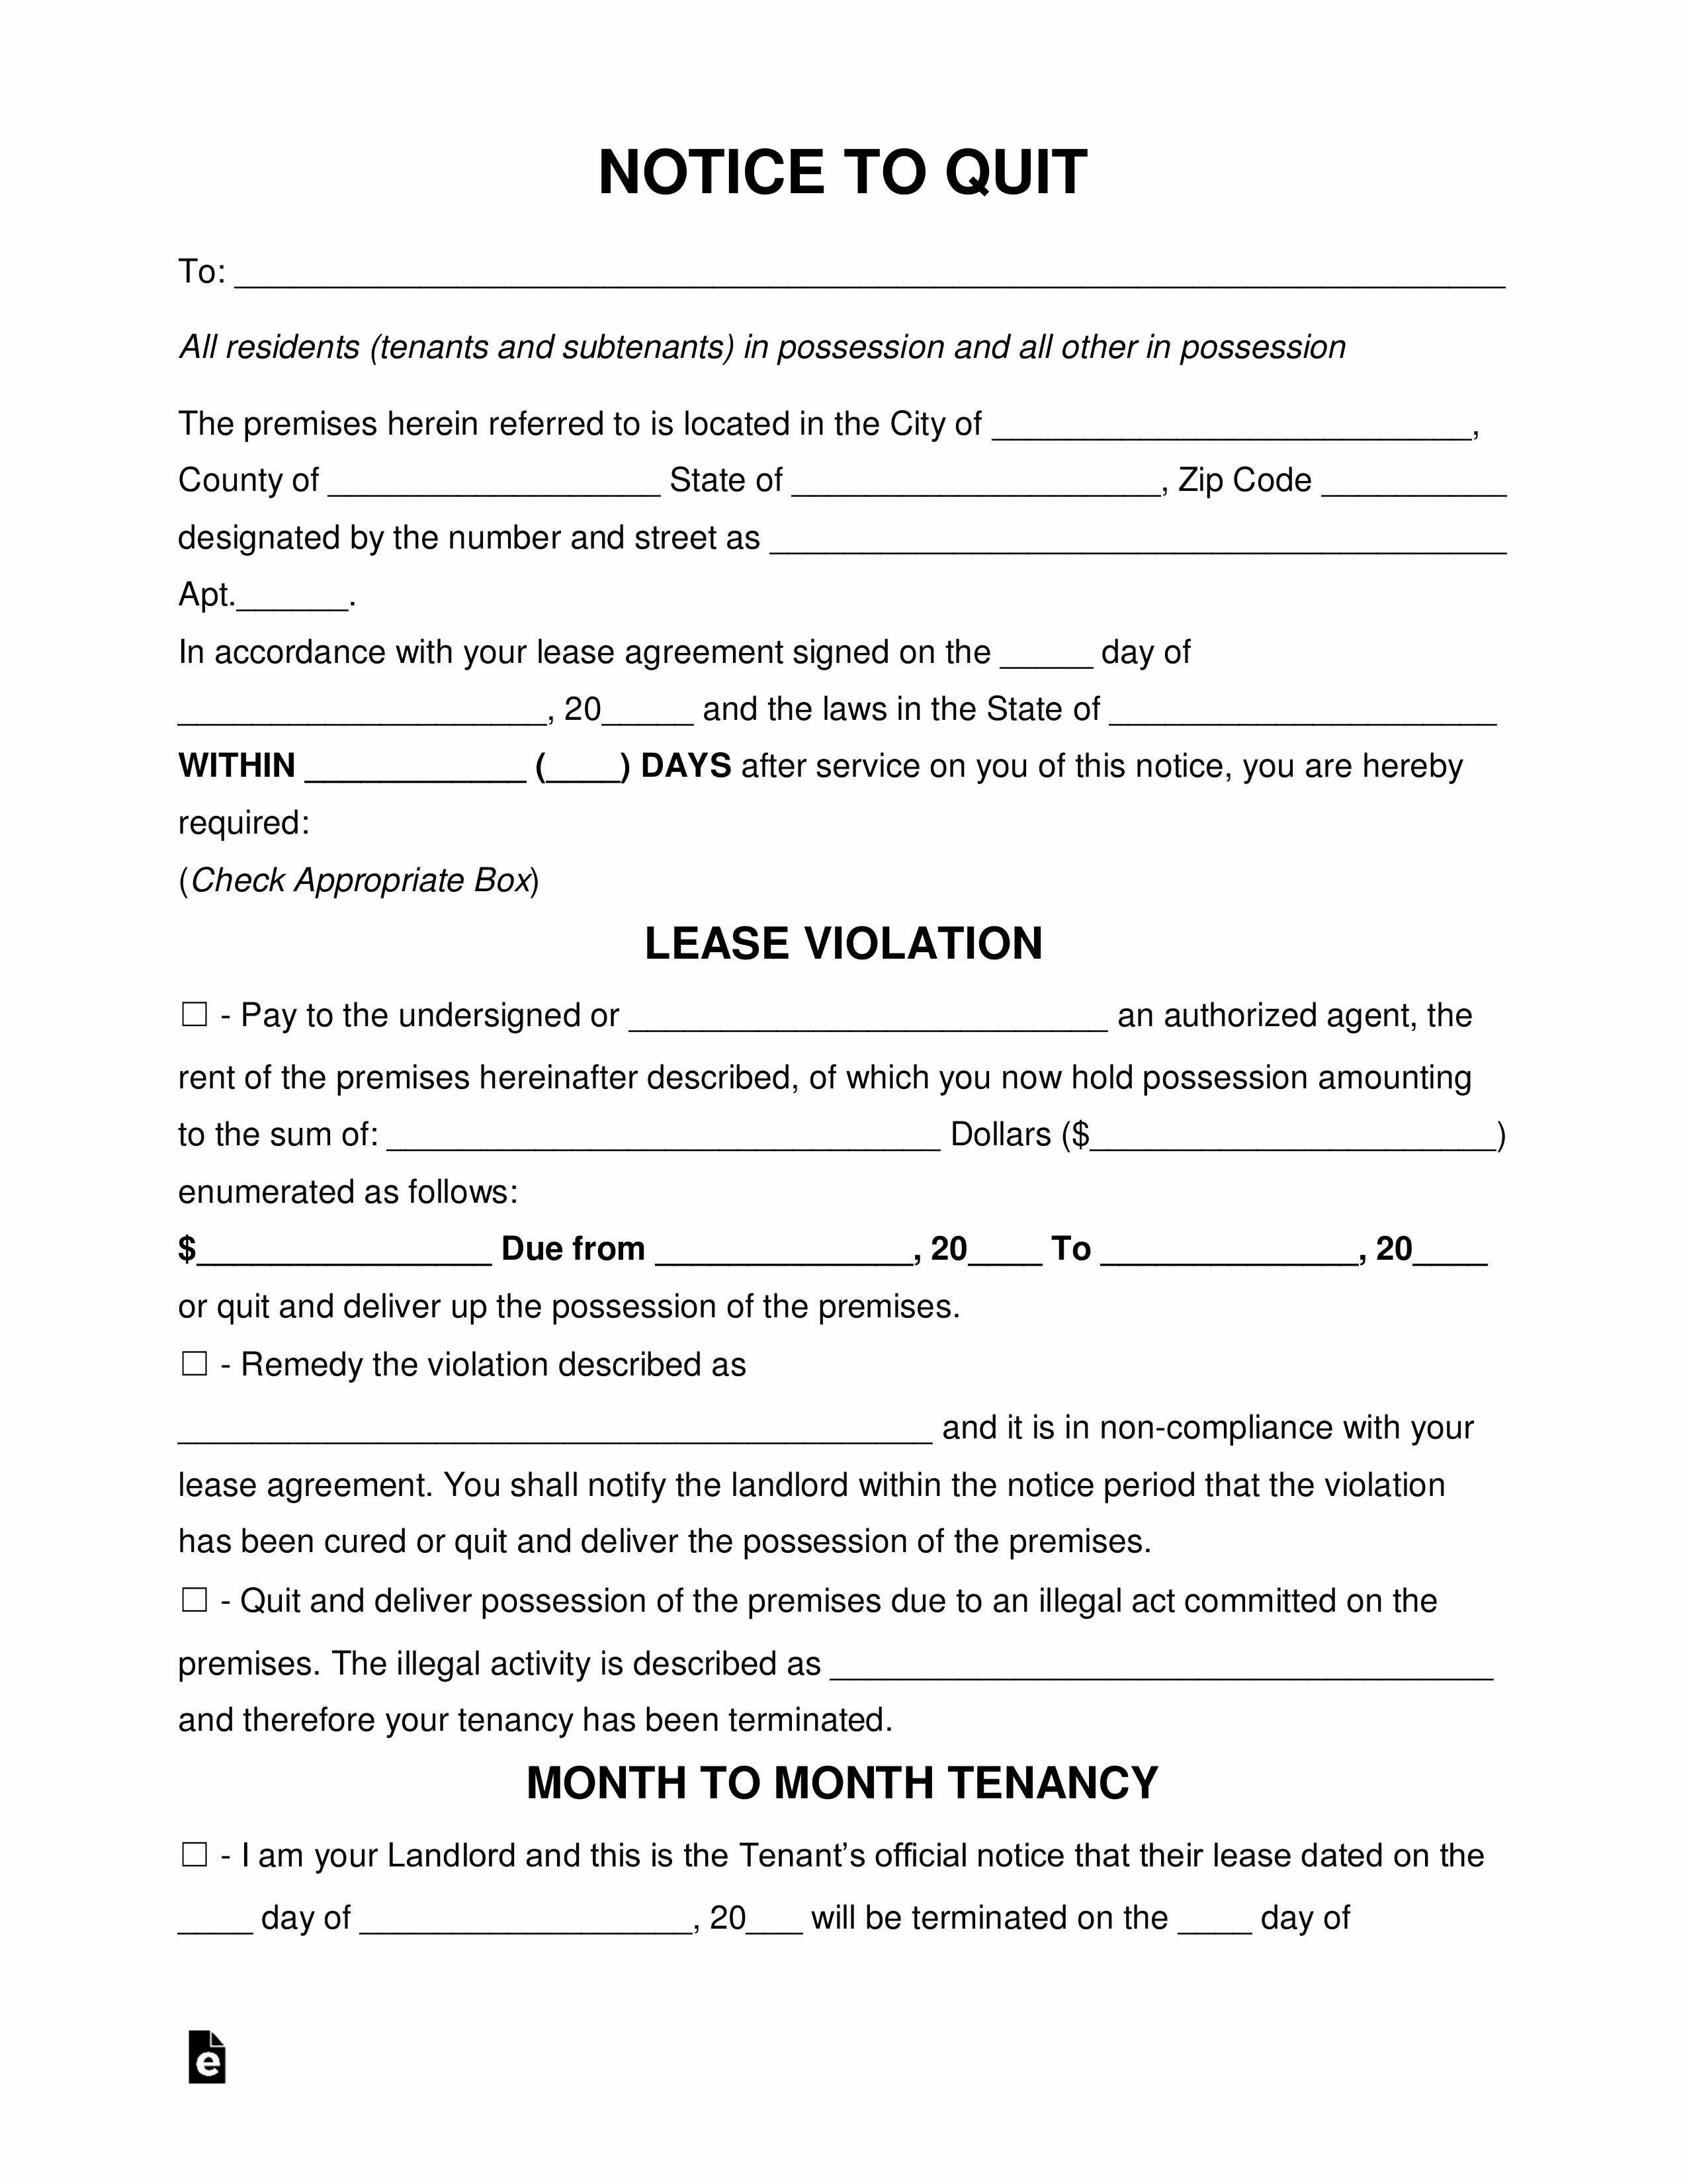 Free Printable Eviction Notice Template Beautiful Free Eviction Notice forms Notices to Quit Pdf